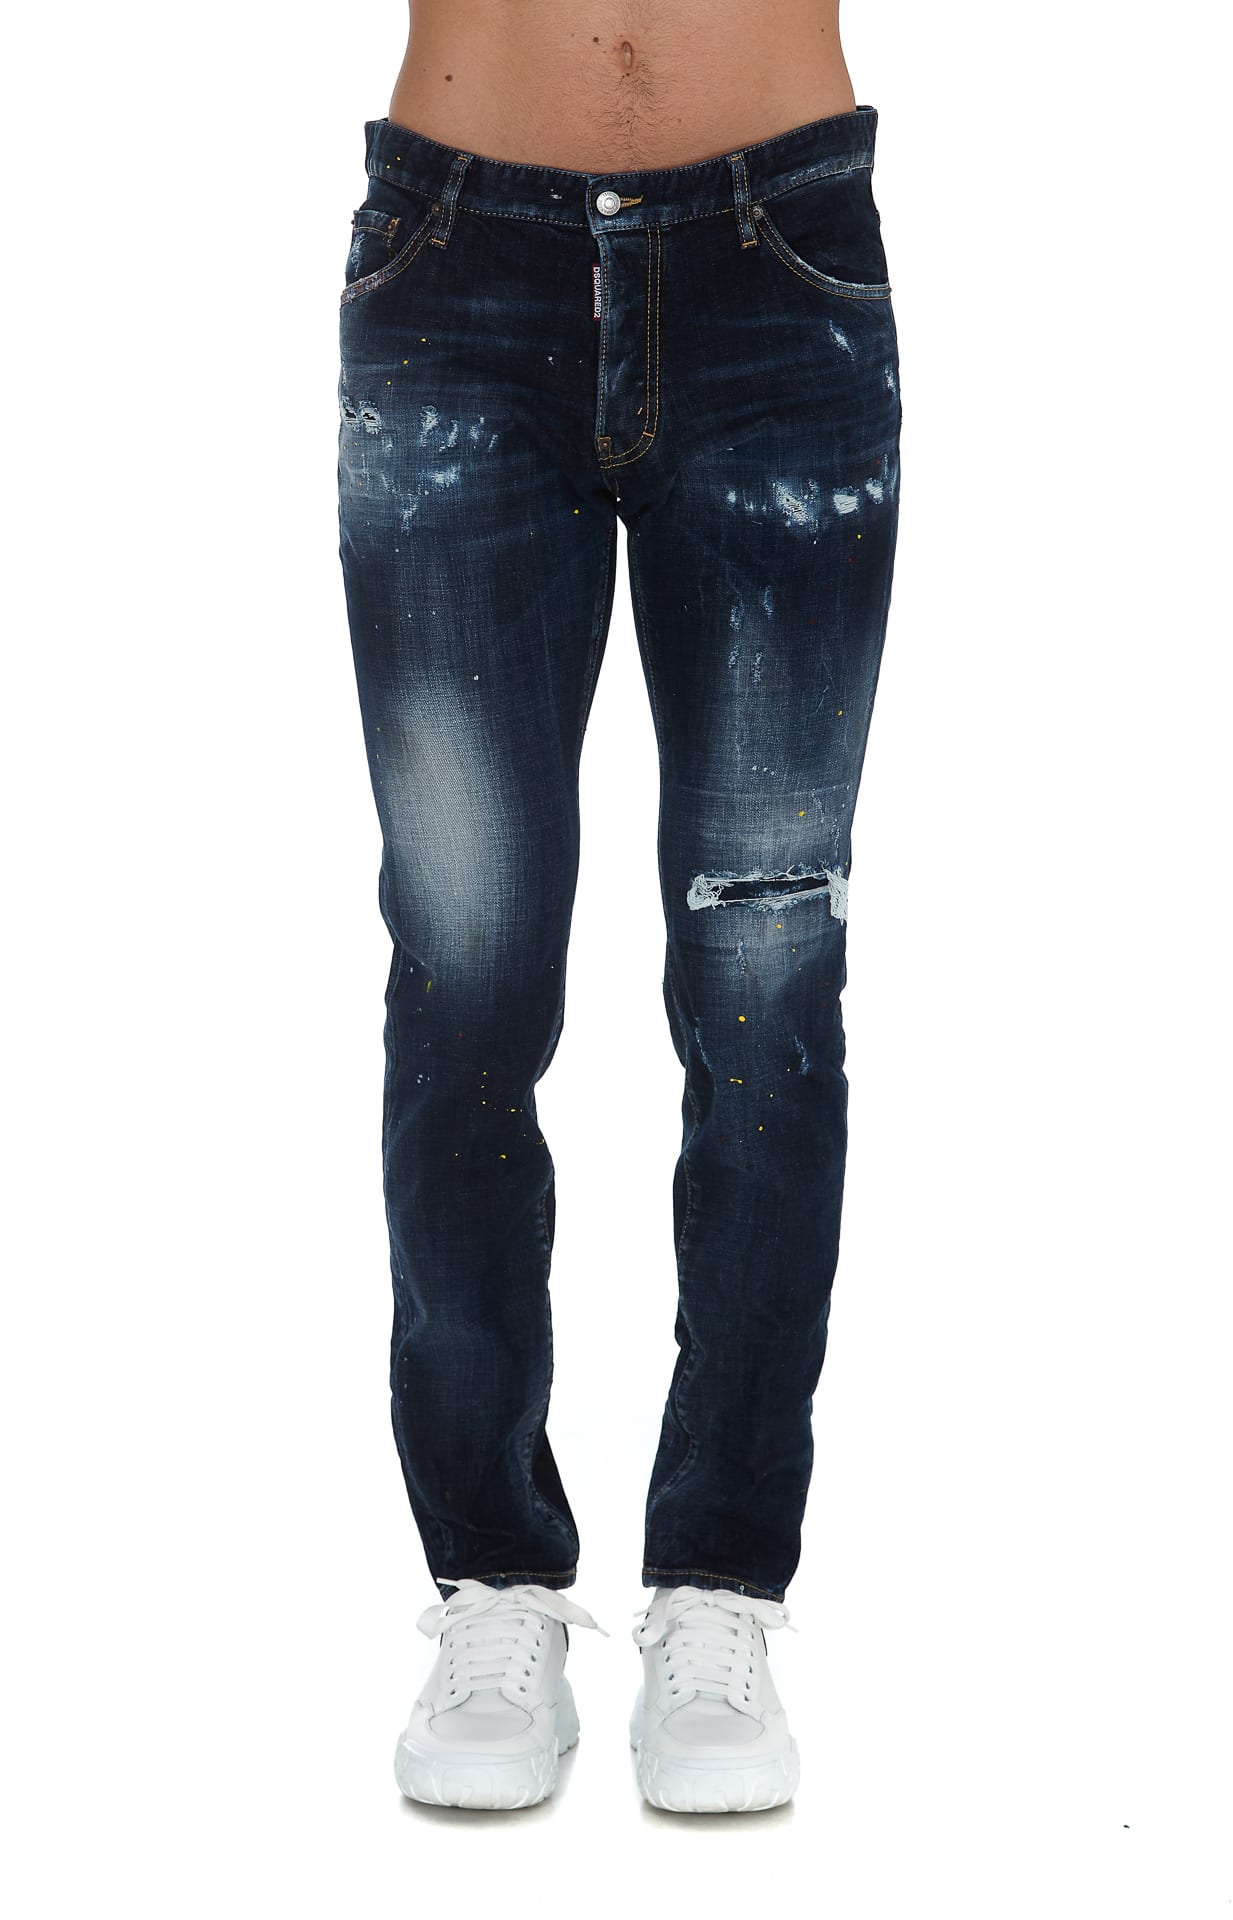 DSQUARED2 COOL GUY JEAN JEANS,S74LB0932S30664 470